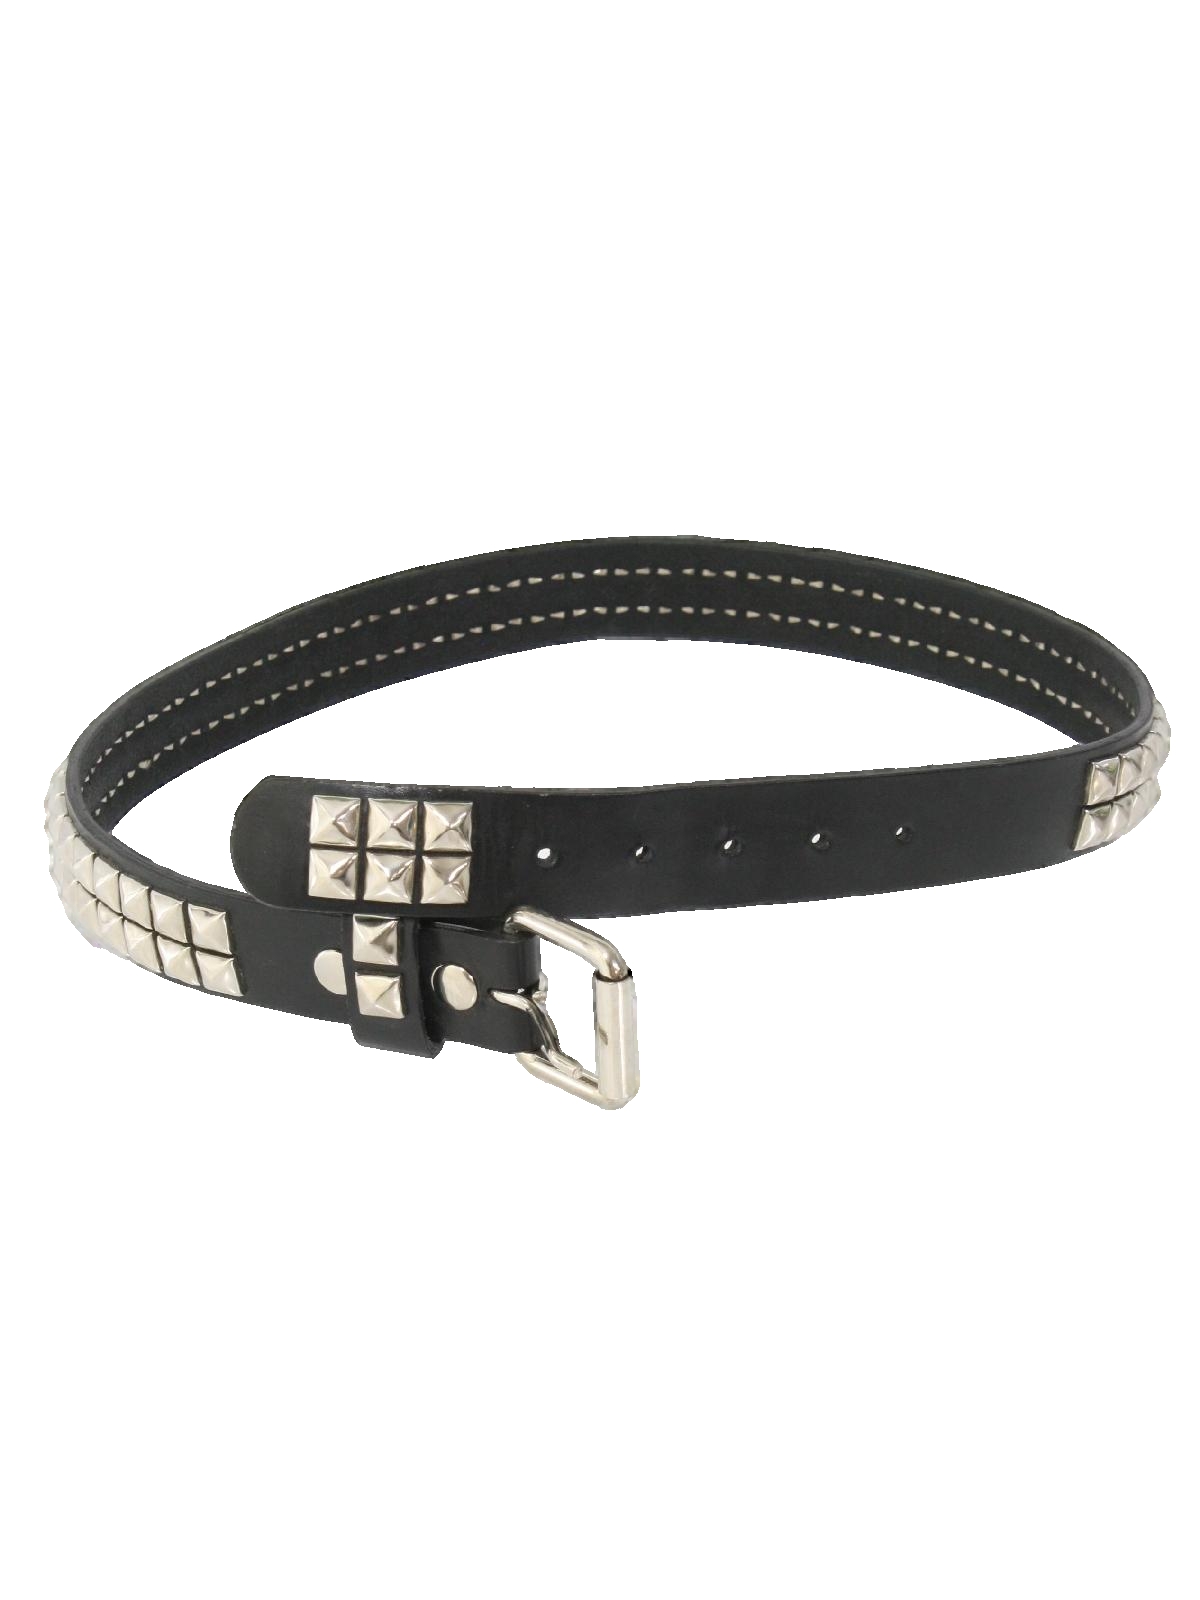 Belt: 90s -Hot Topic- Unisex black background leather, silver studded ...